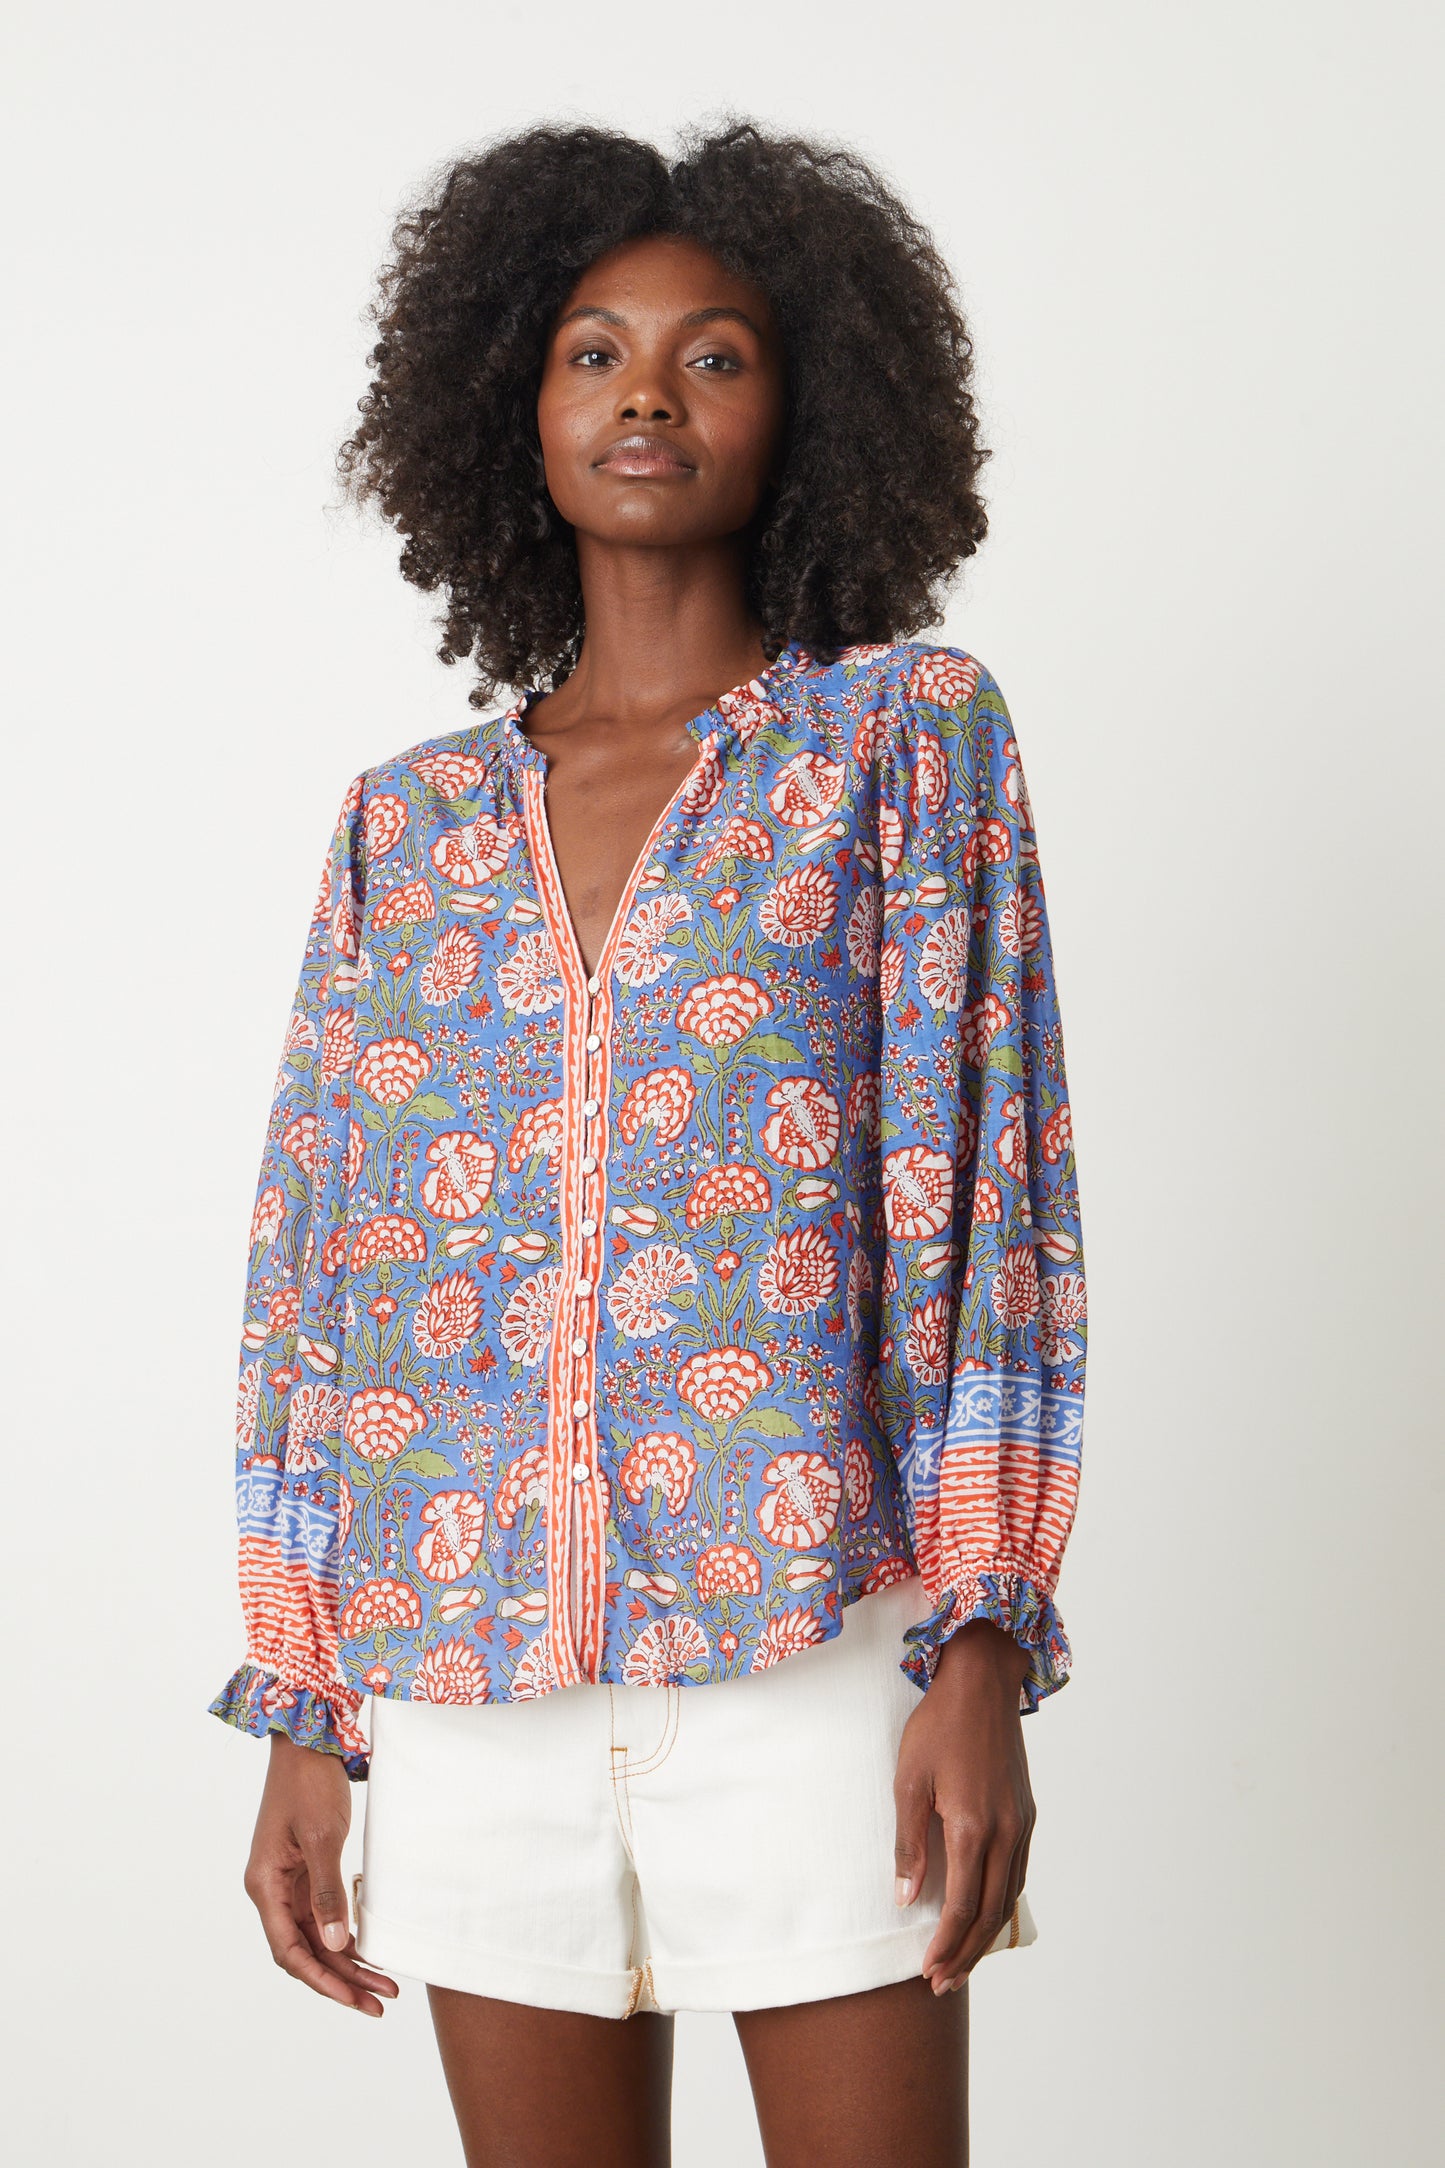 The model is wearing a Velvet by Graham & Spencer MARCELLA PRINTED BOHO TOP.-26577341808833